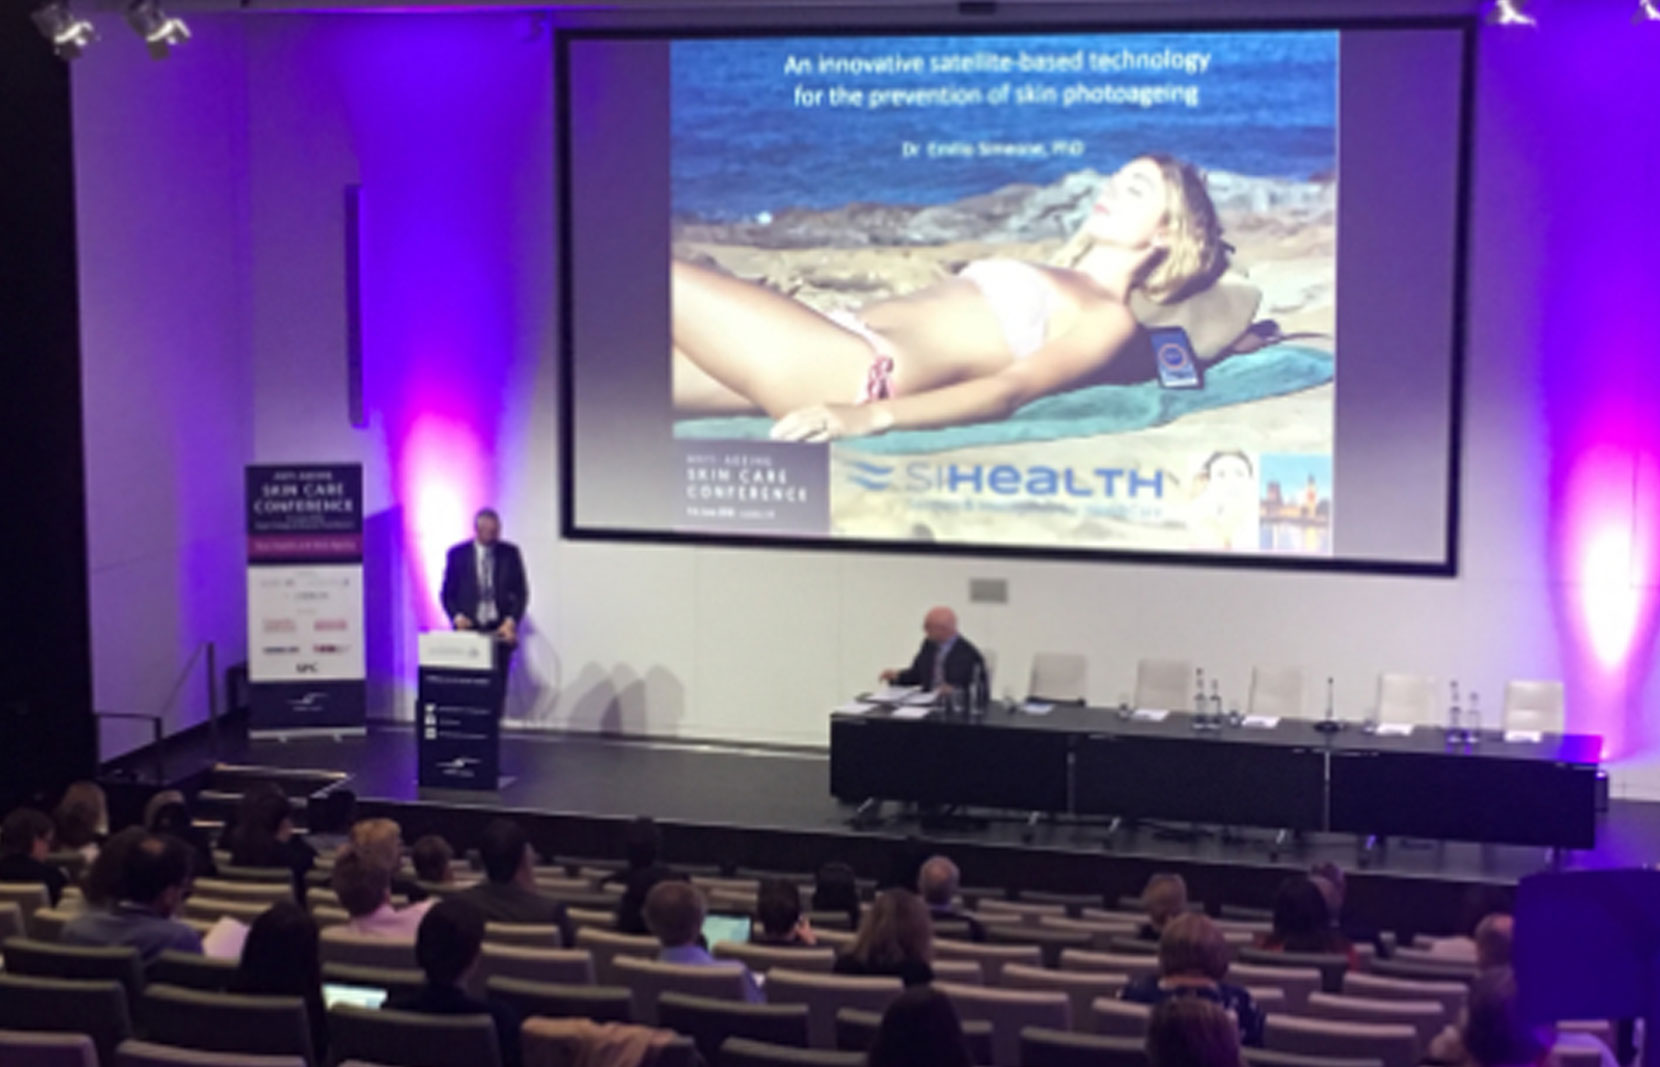 siHealth at the 6th Anti-Ageing Skin Care Conference in London